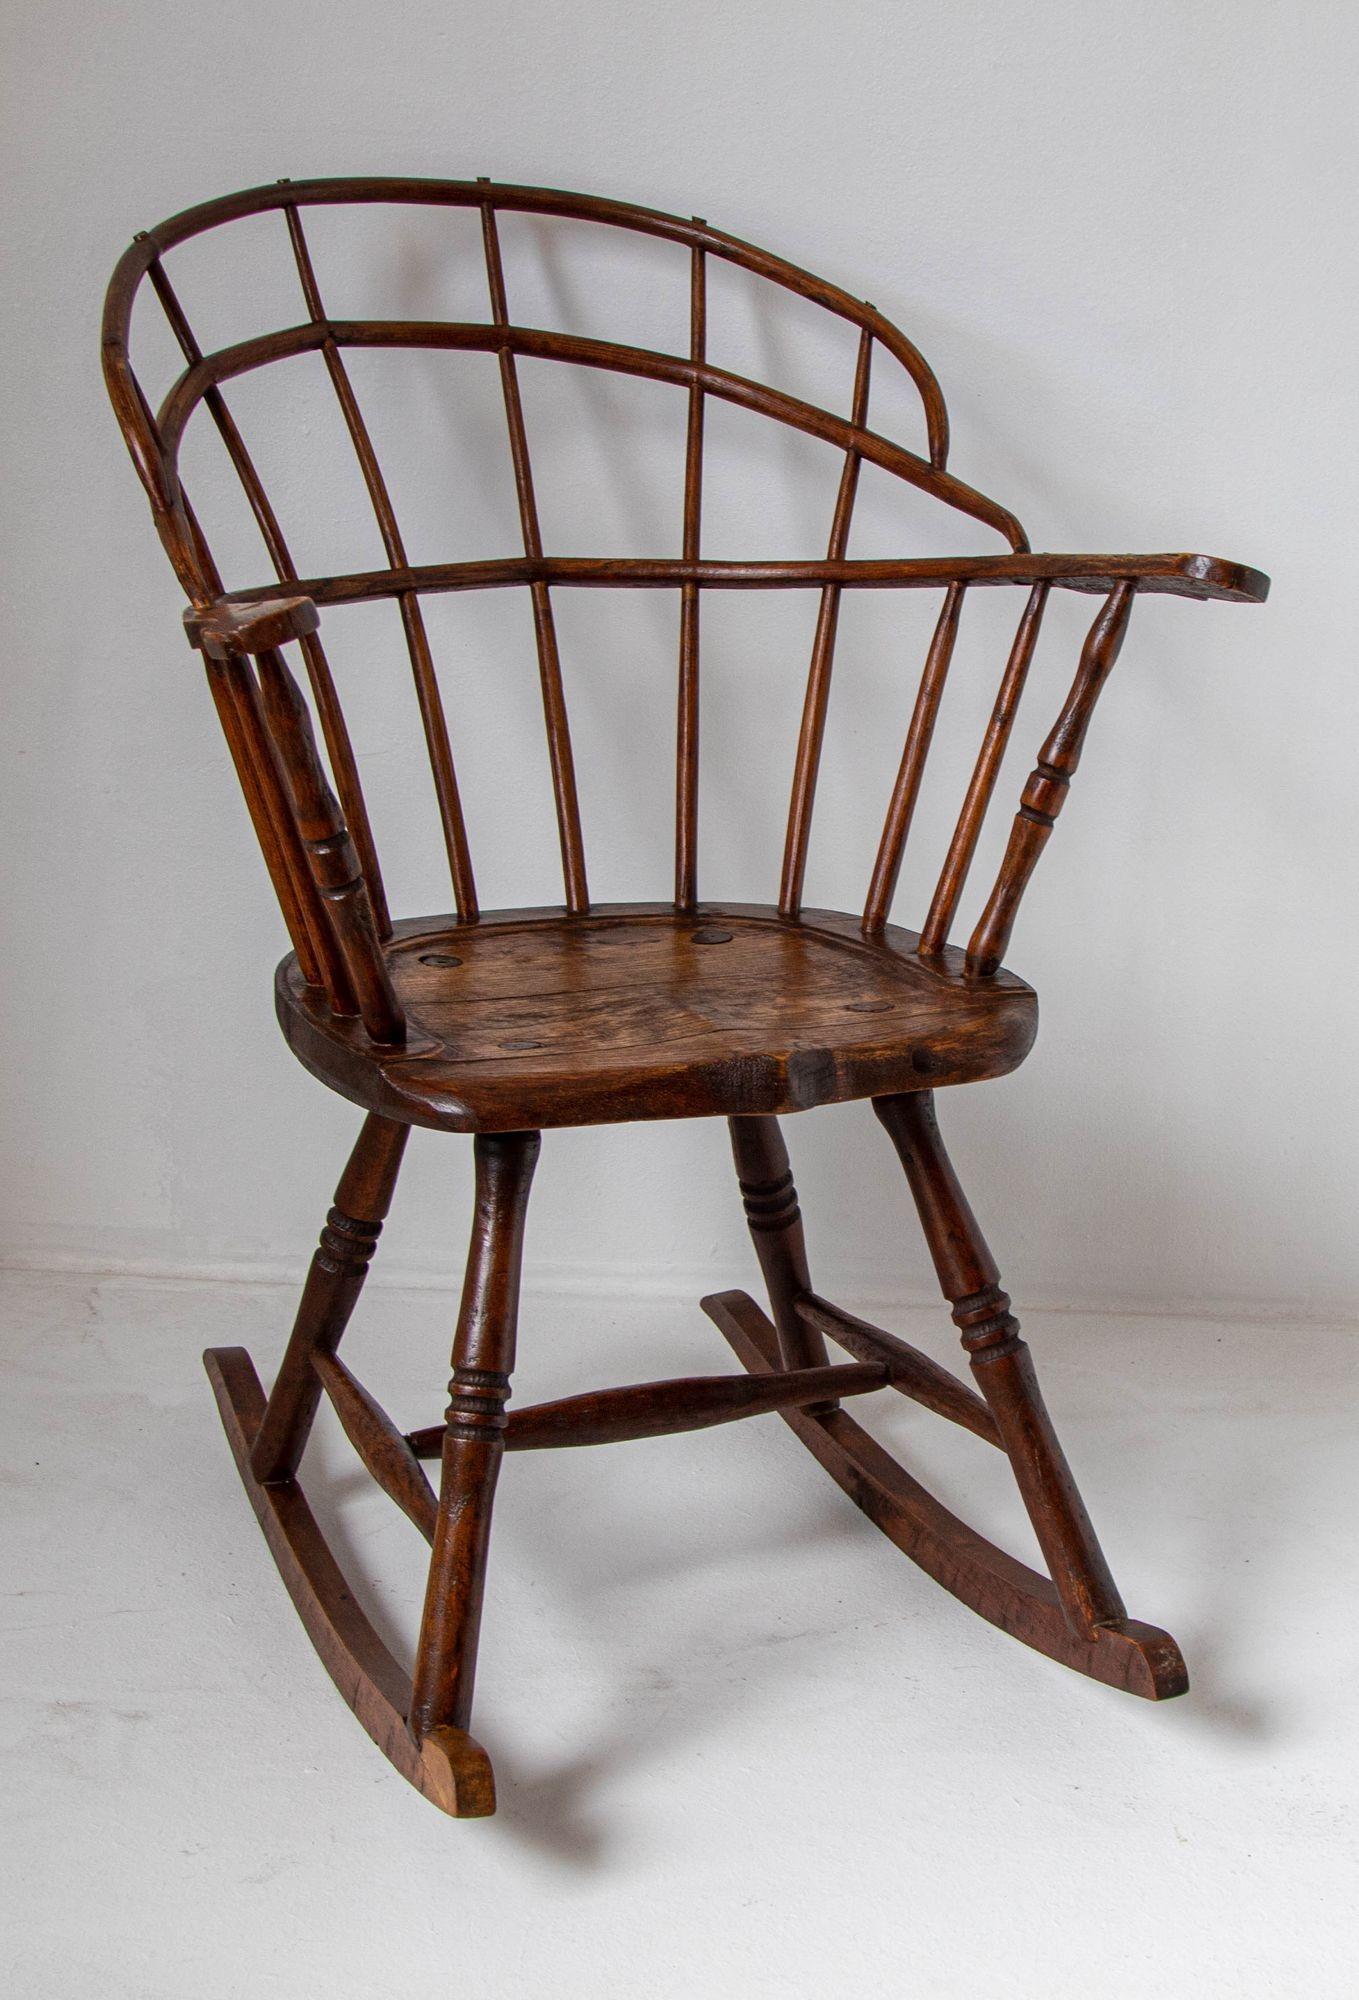 18th Century Bentwood Windsor Fan back Rocking Chair.
An interesting late 18th century elm Sack-back Windsor Rocking Chair.
Interesting and rare continuous bentwood fanback construction, outward-curving spindles, bowed arm rest terminating in webbed